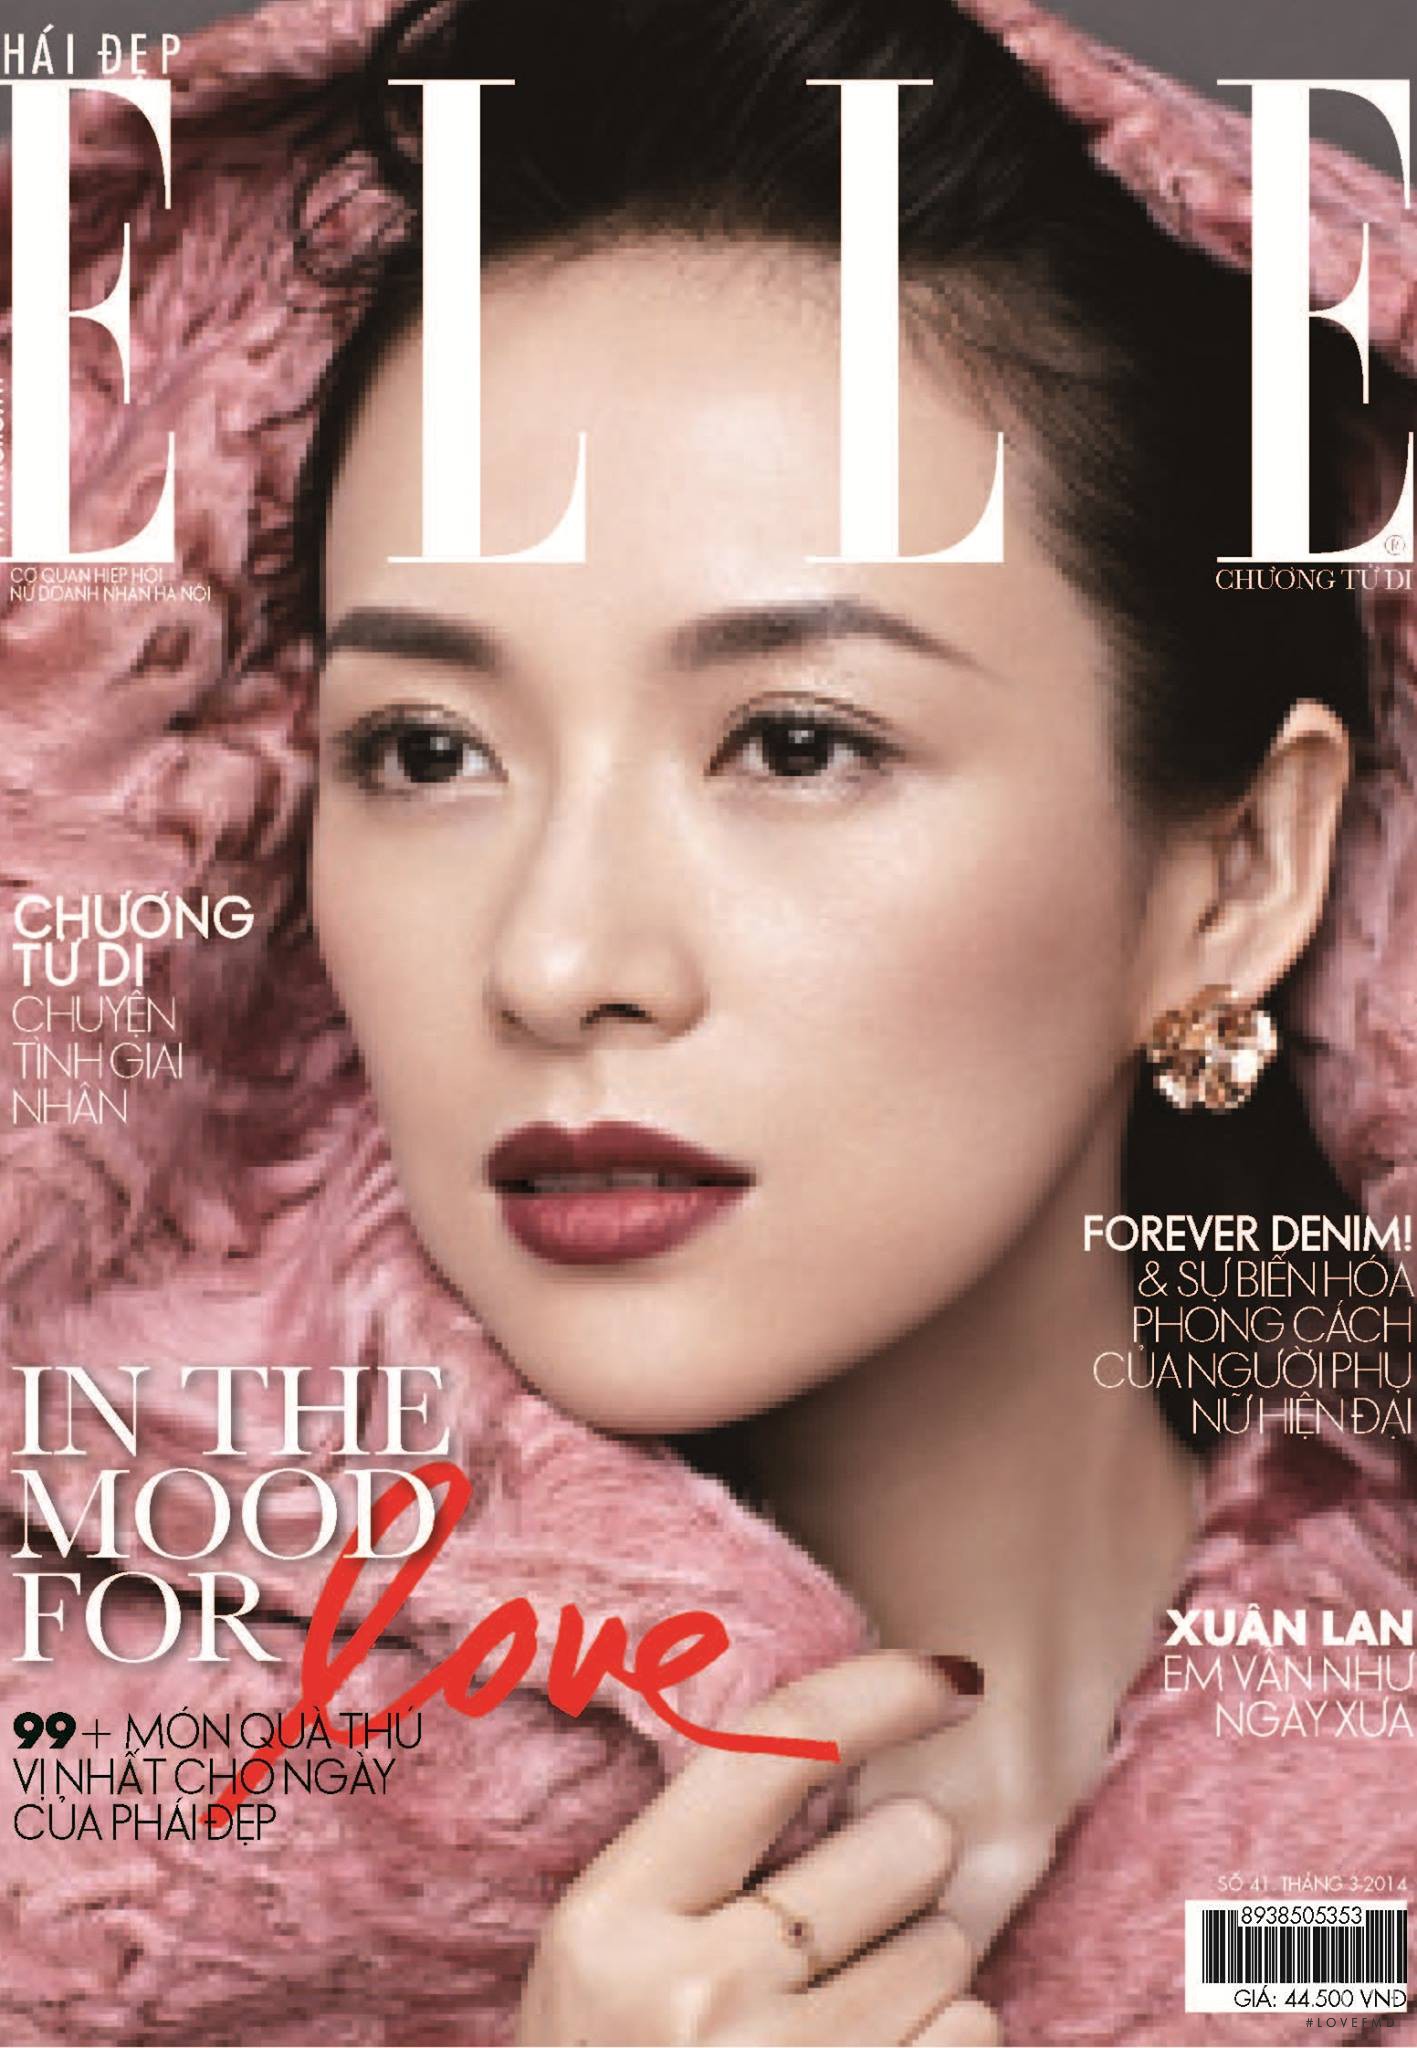 Cover of Elle Vietnam with Zhang Ziyi, March 2014 (ID:28004)| Magazines ...